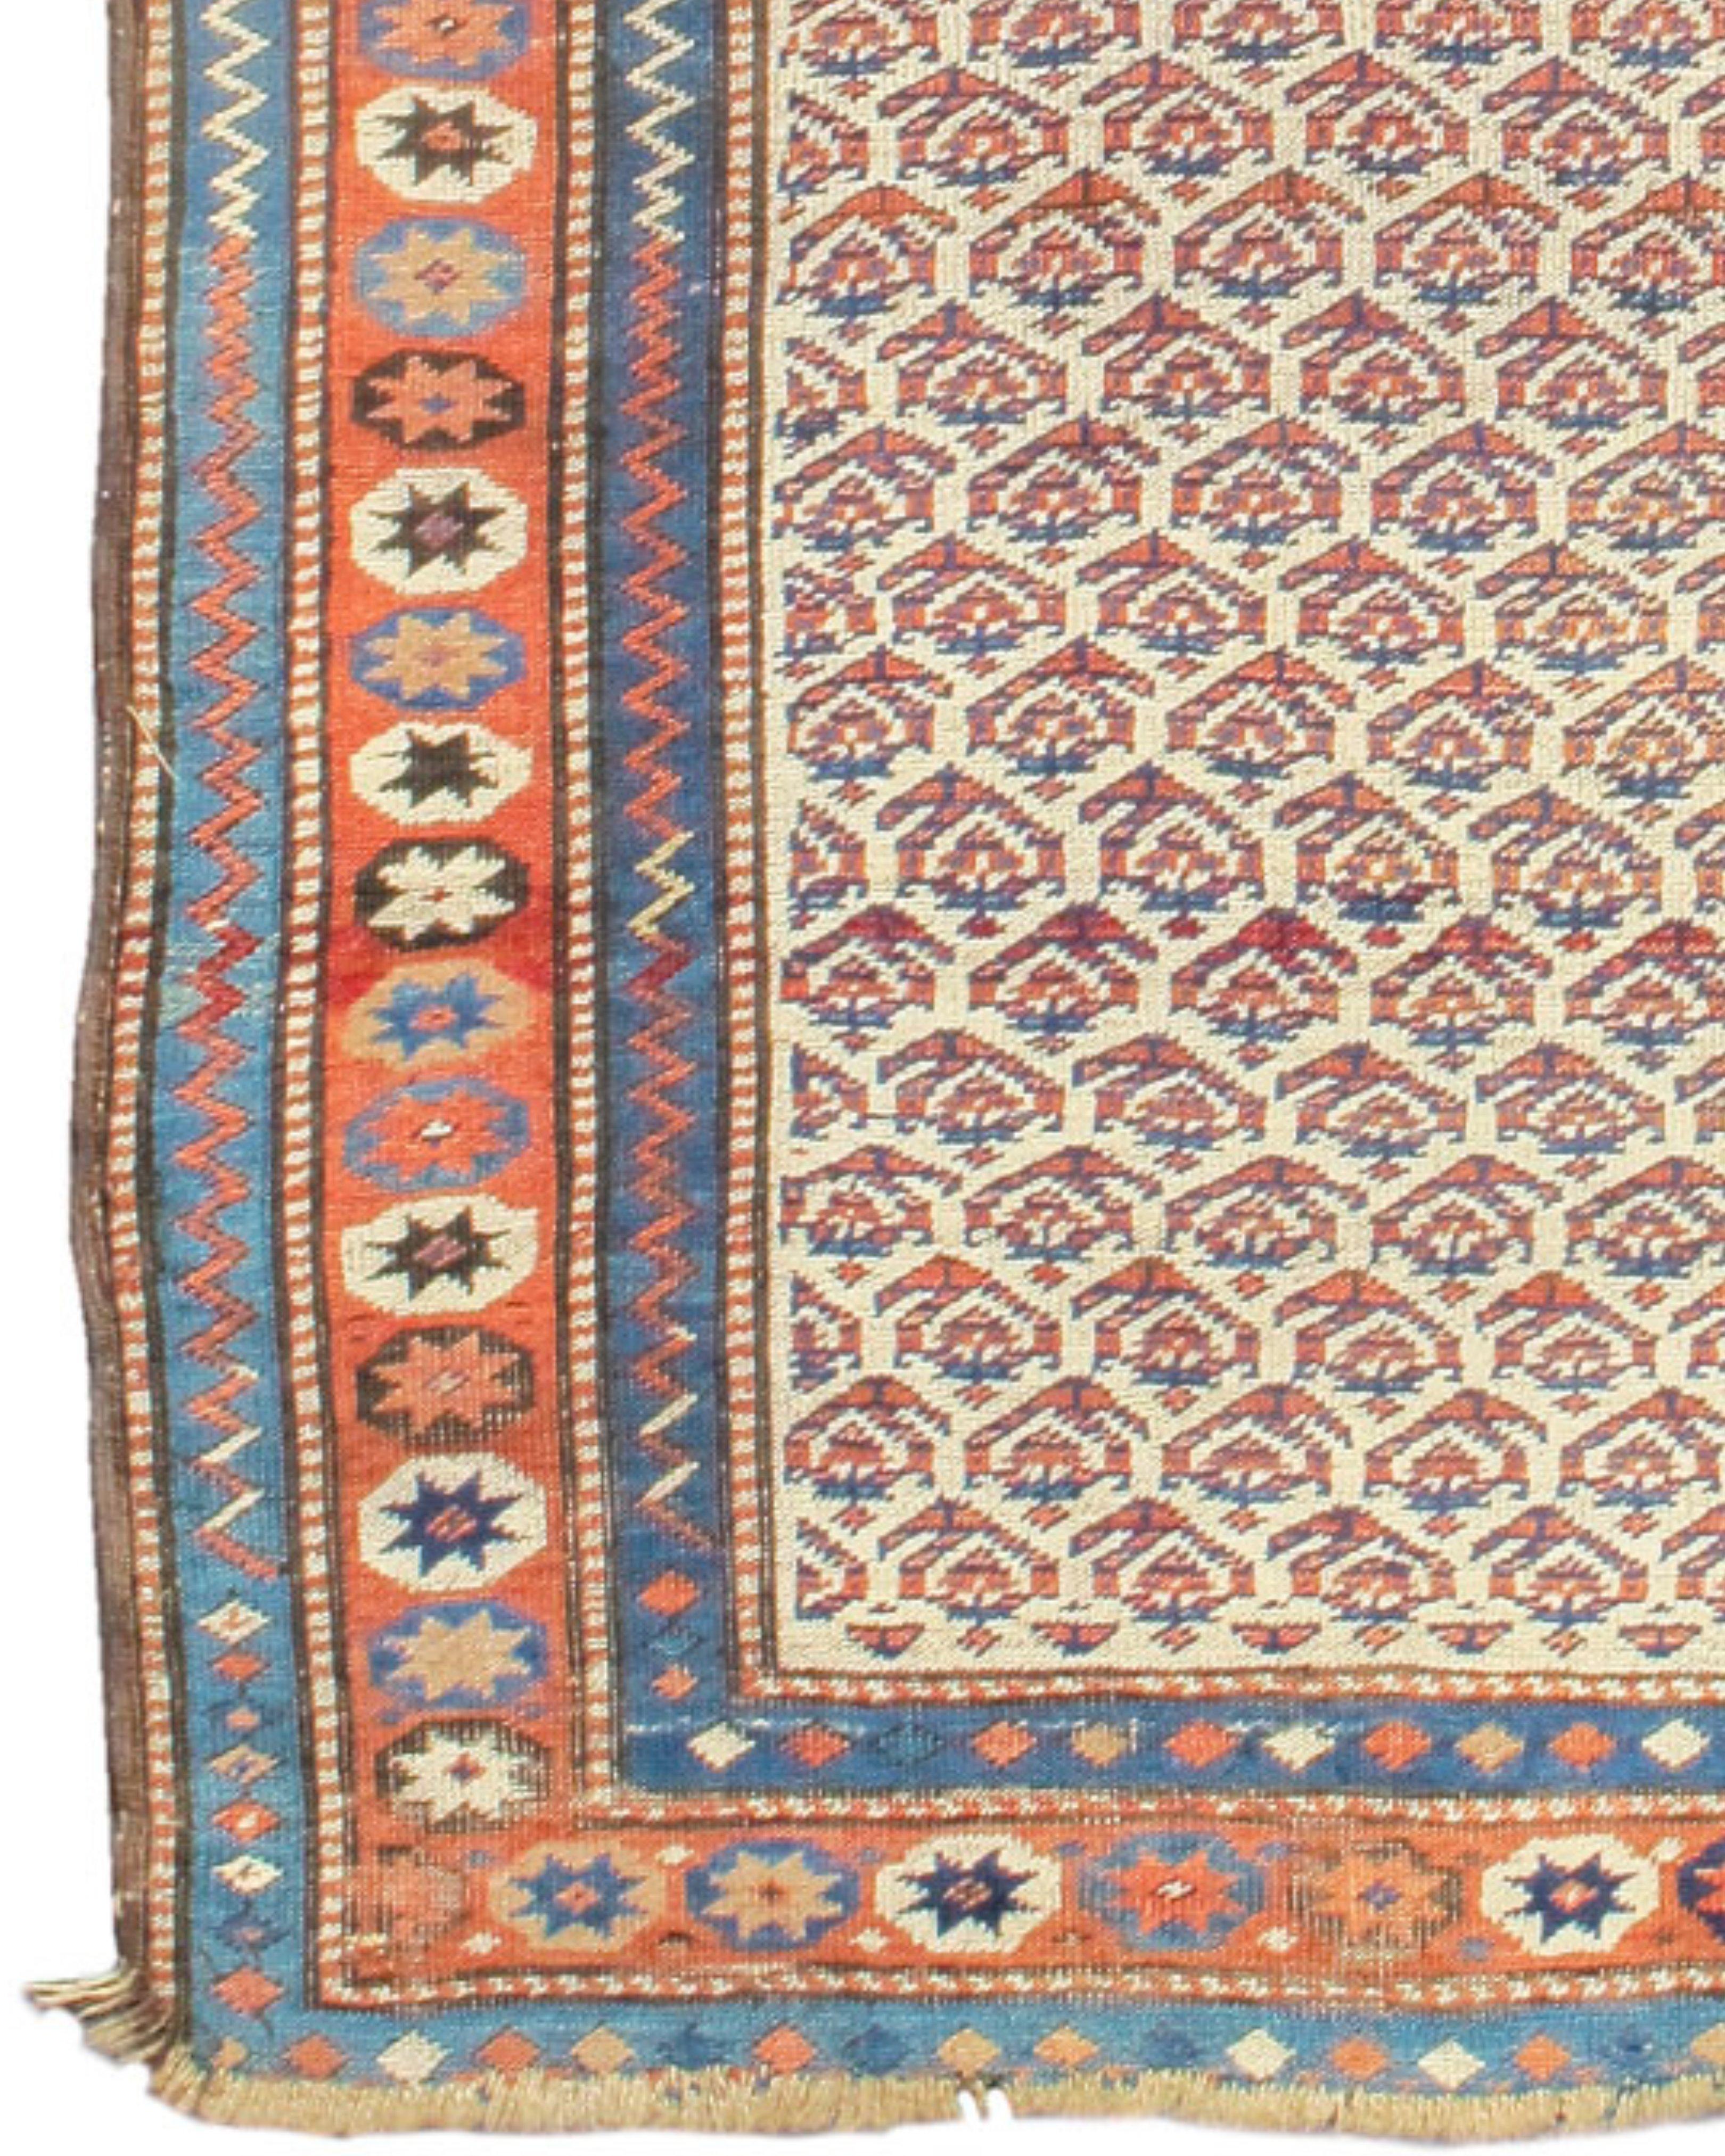 Antique Northwest Persian Runner Rug, c. 1900 In Good Condition For Sale In San Francisco, CA